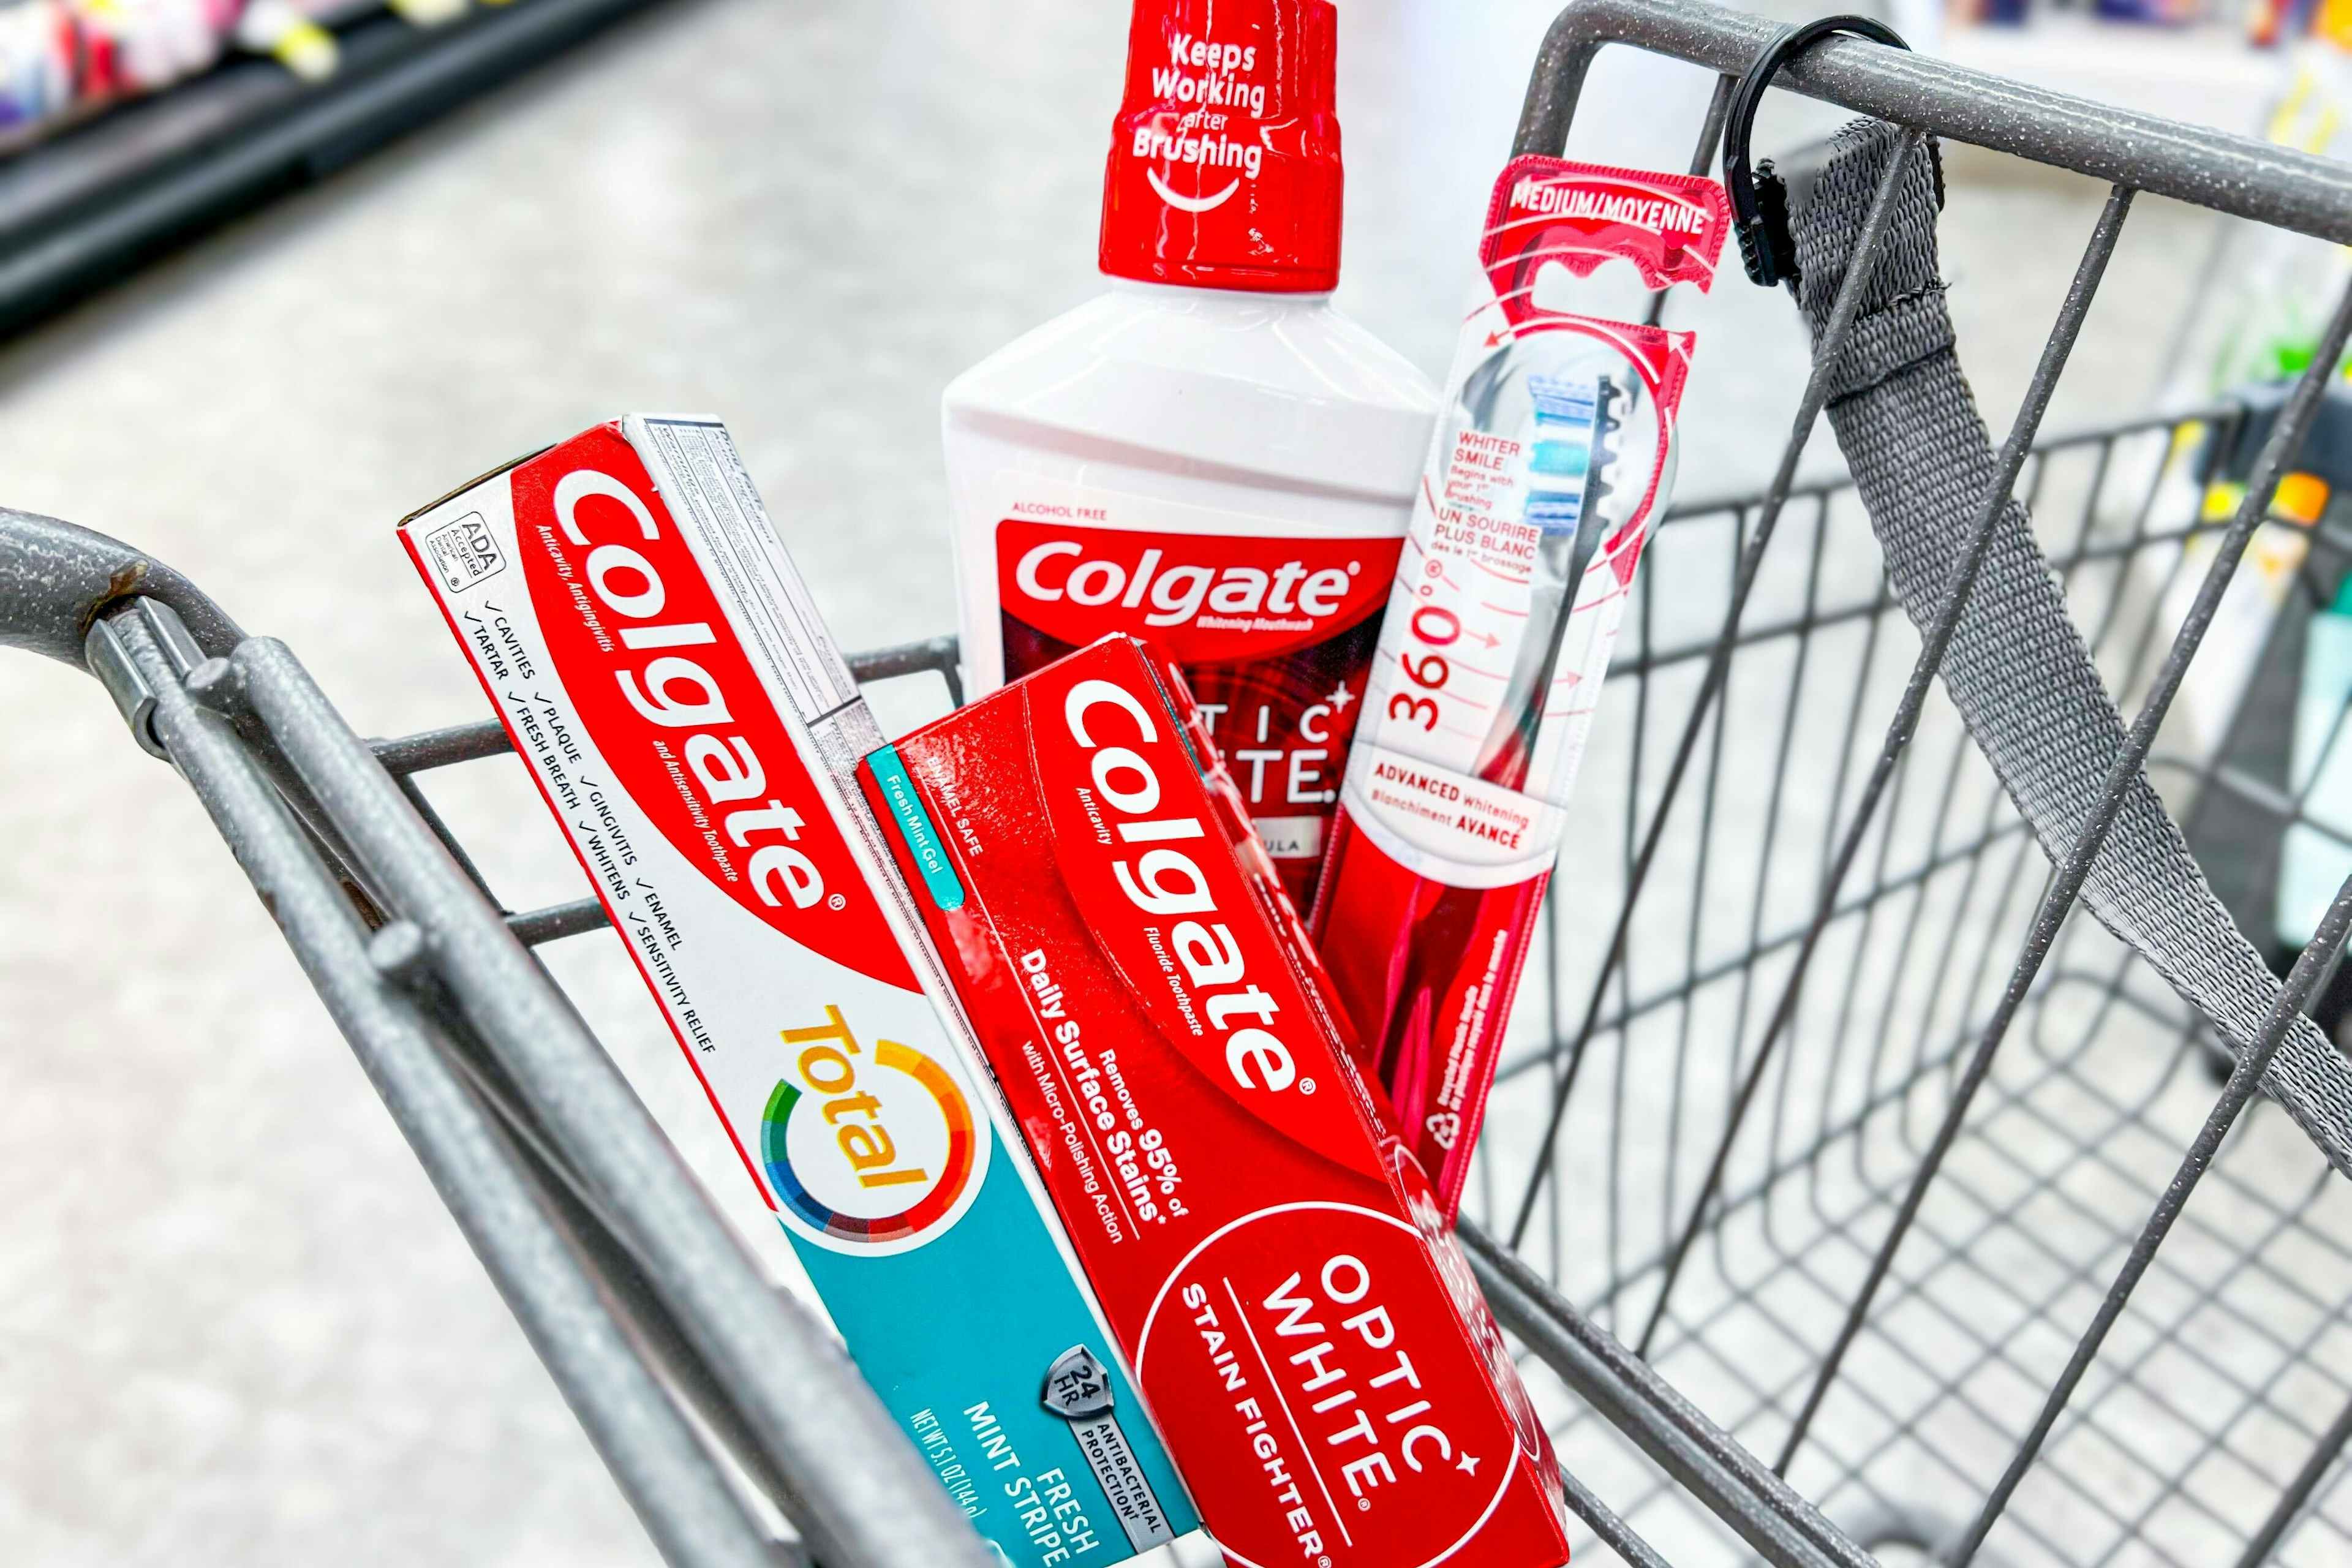 walgreens colgate toothpaste, mouthwash and toothbrush695